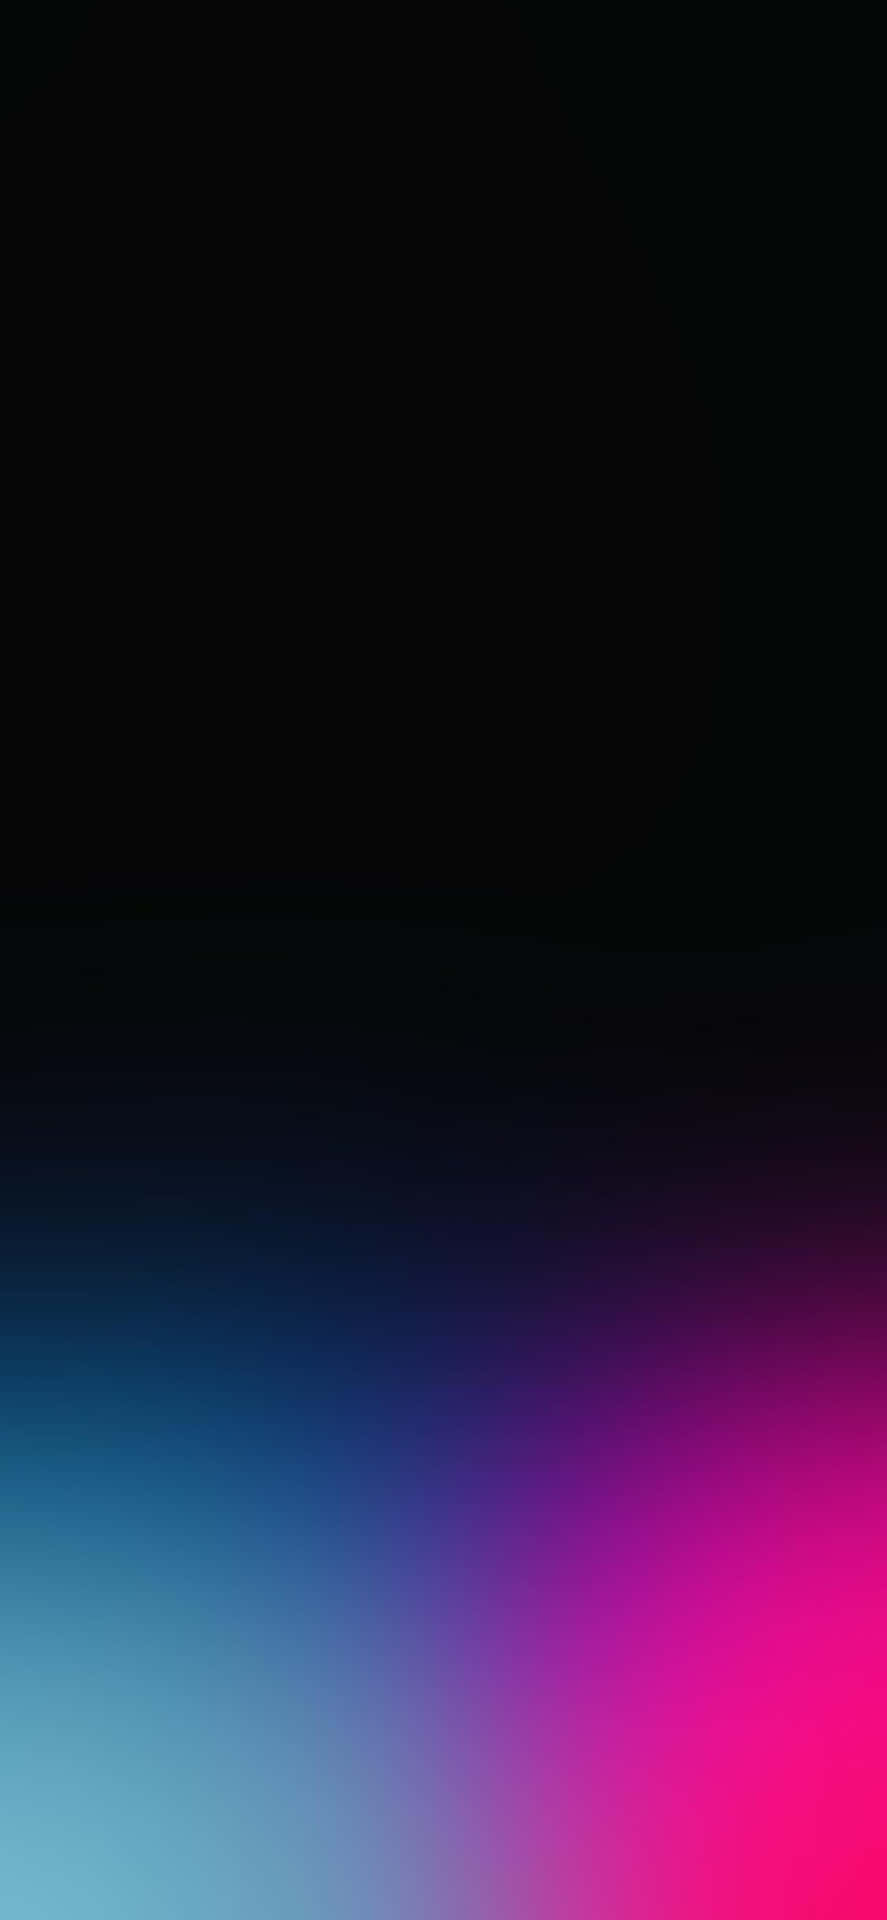 Dark Gradient With Blue And Pink Wallpaper